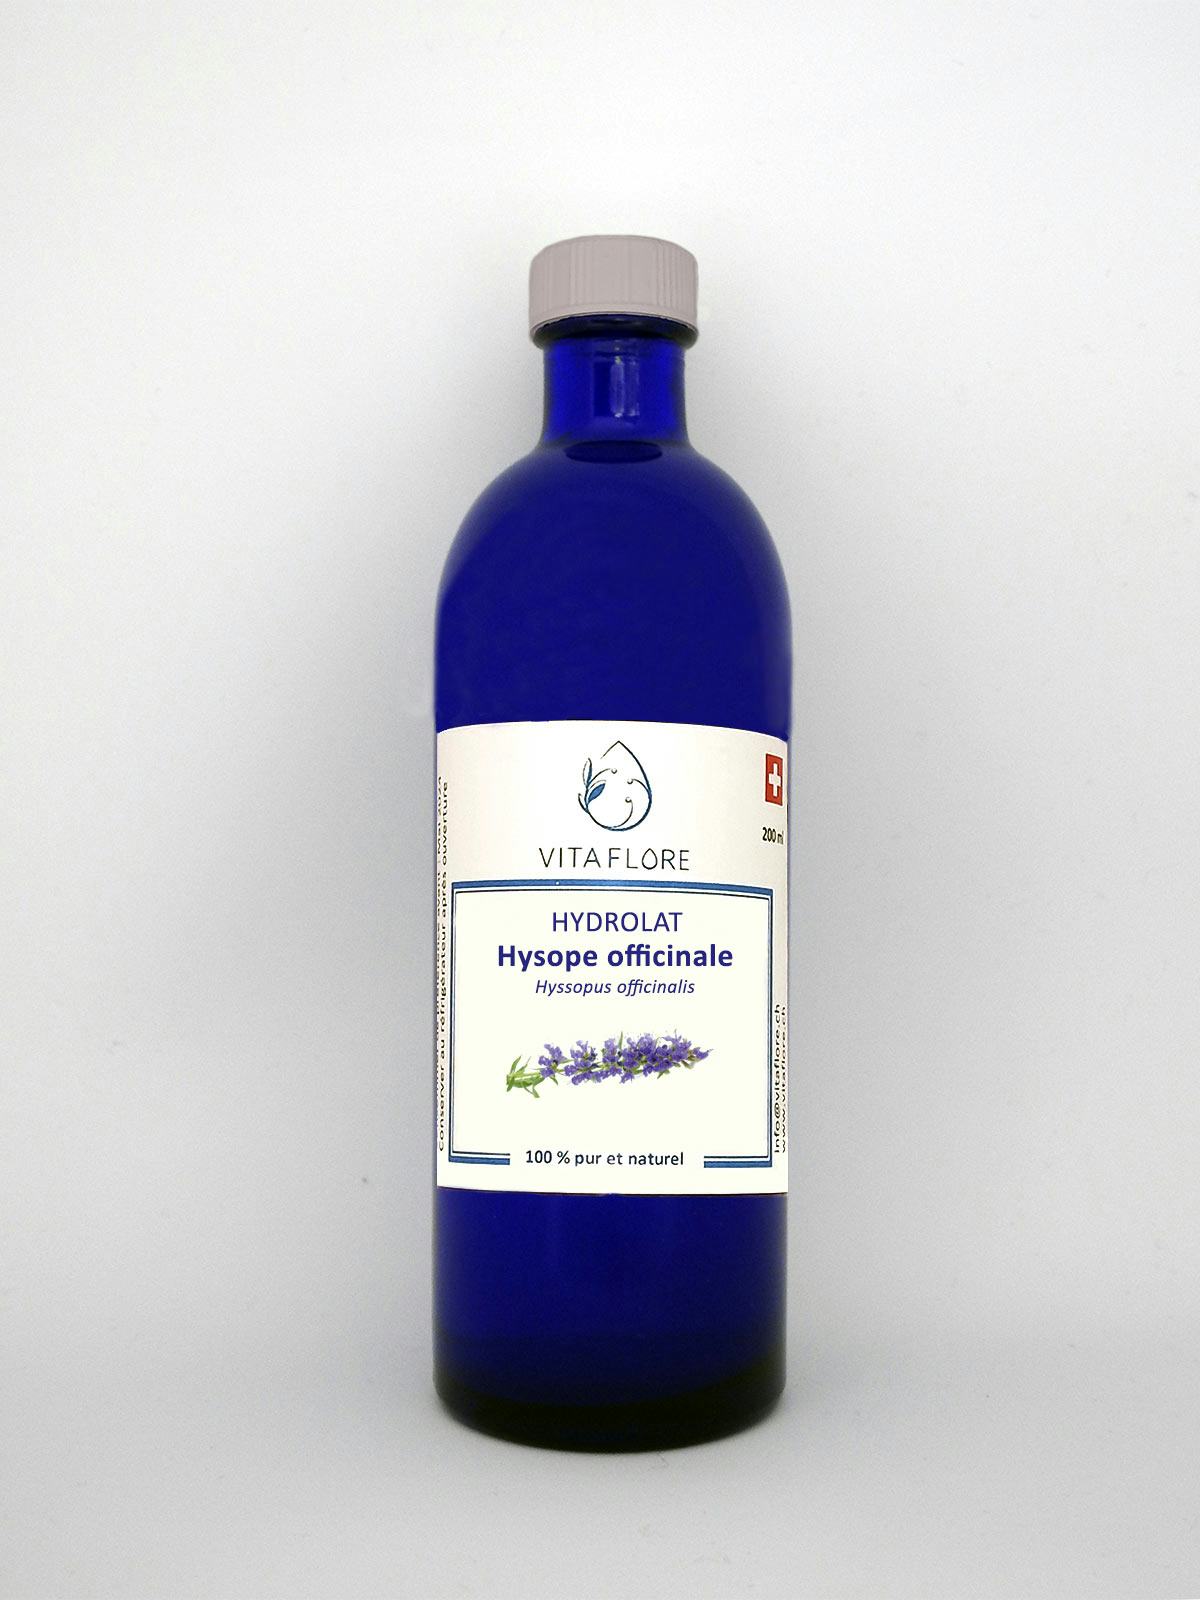 Hydrolat Hysope officinale, artisanal product for direct sale in Switzerland